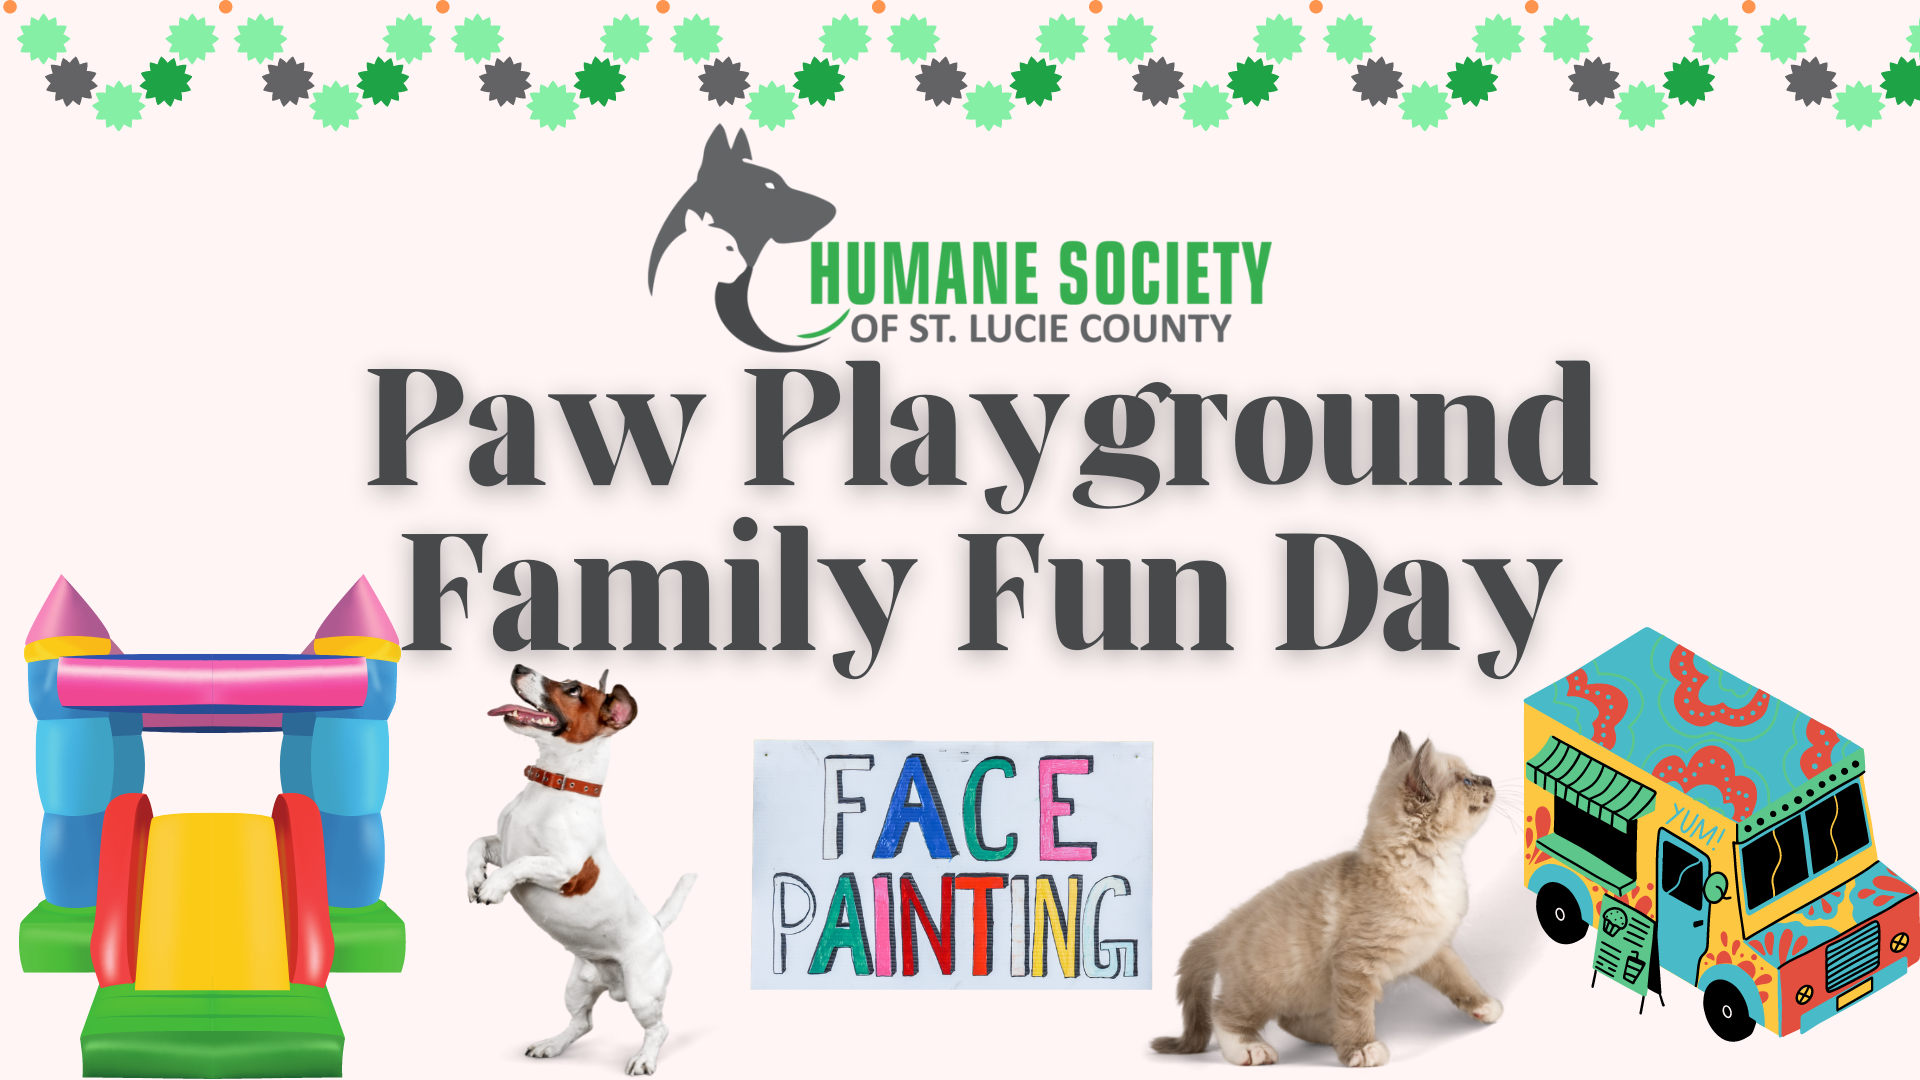 Paw Playground at the Humane Society of St. Lucie County